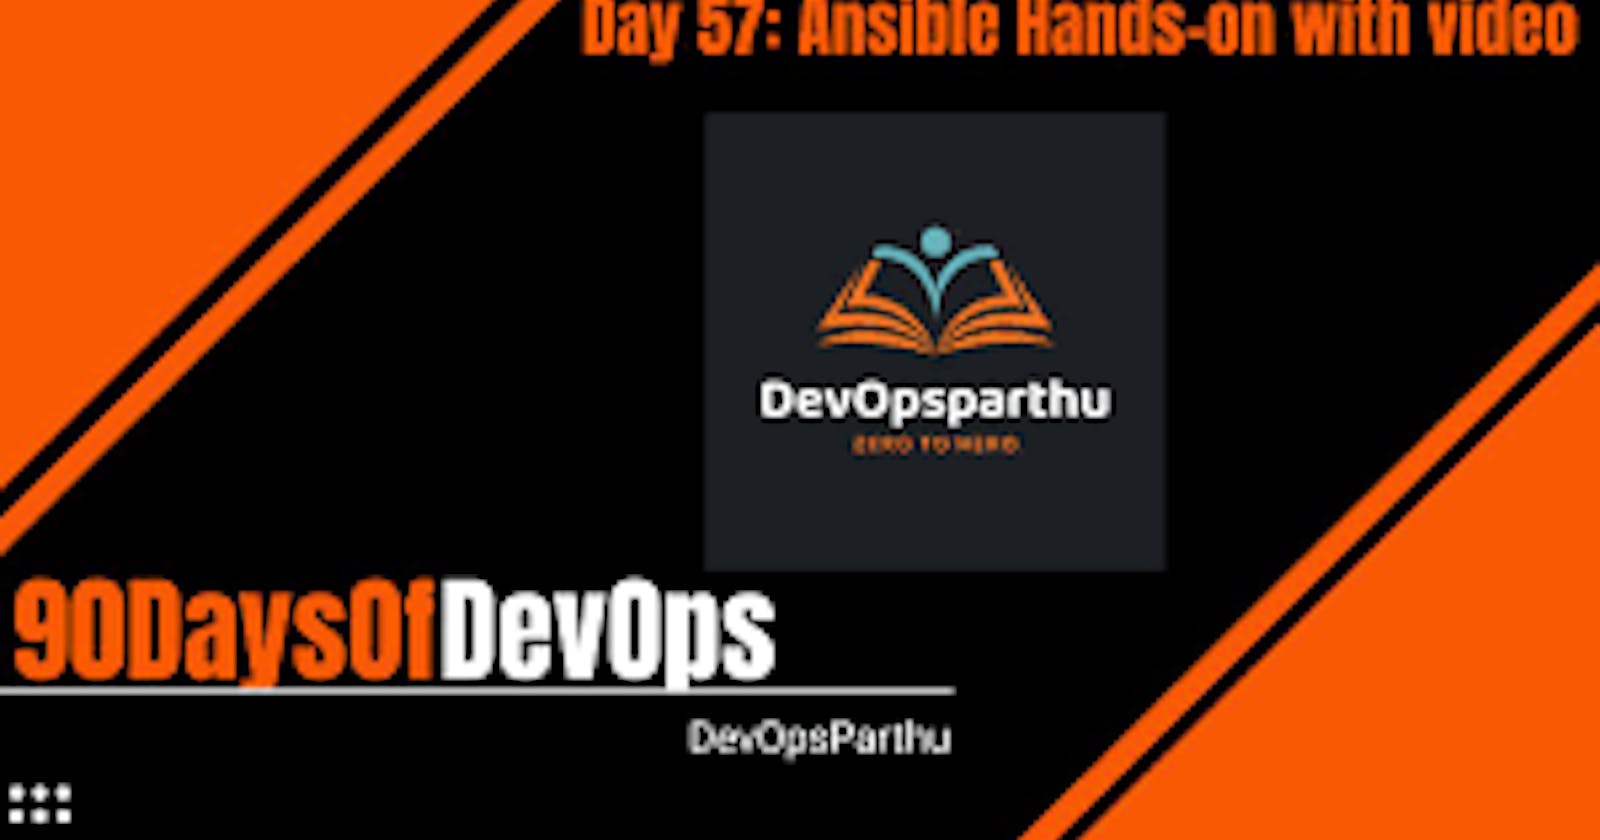 Day 57 - Ansible Hands-on with video